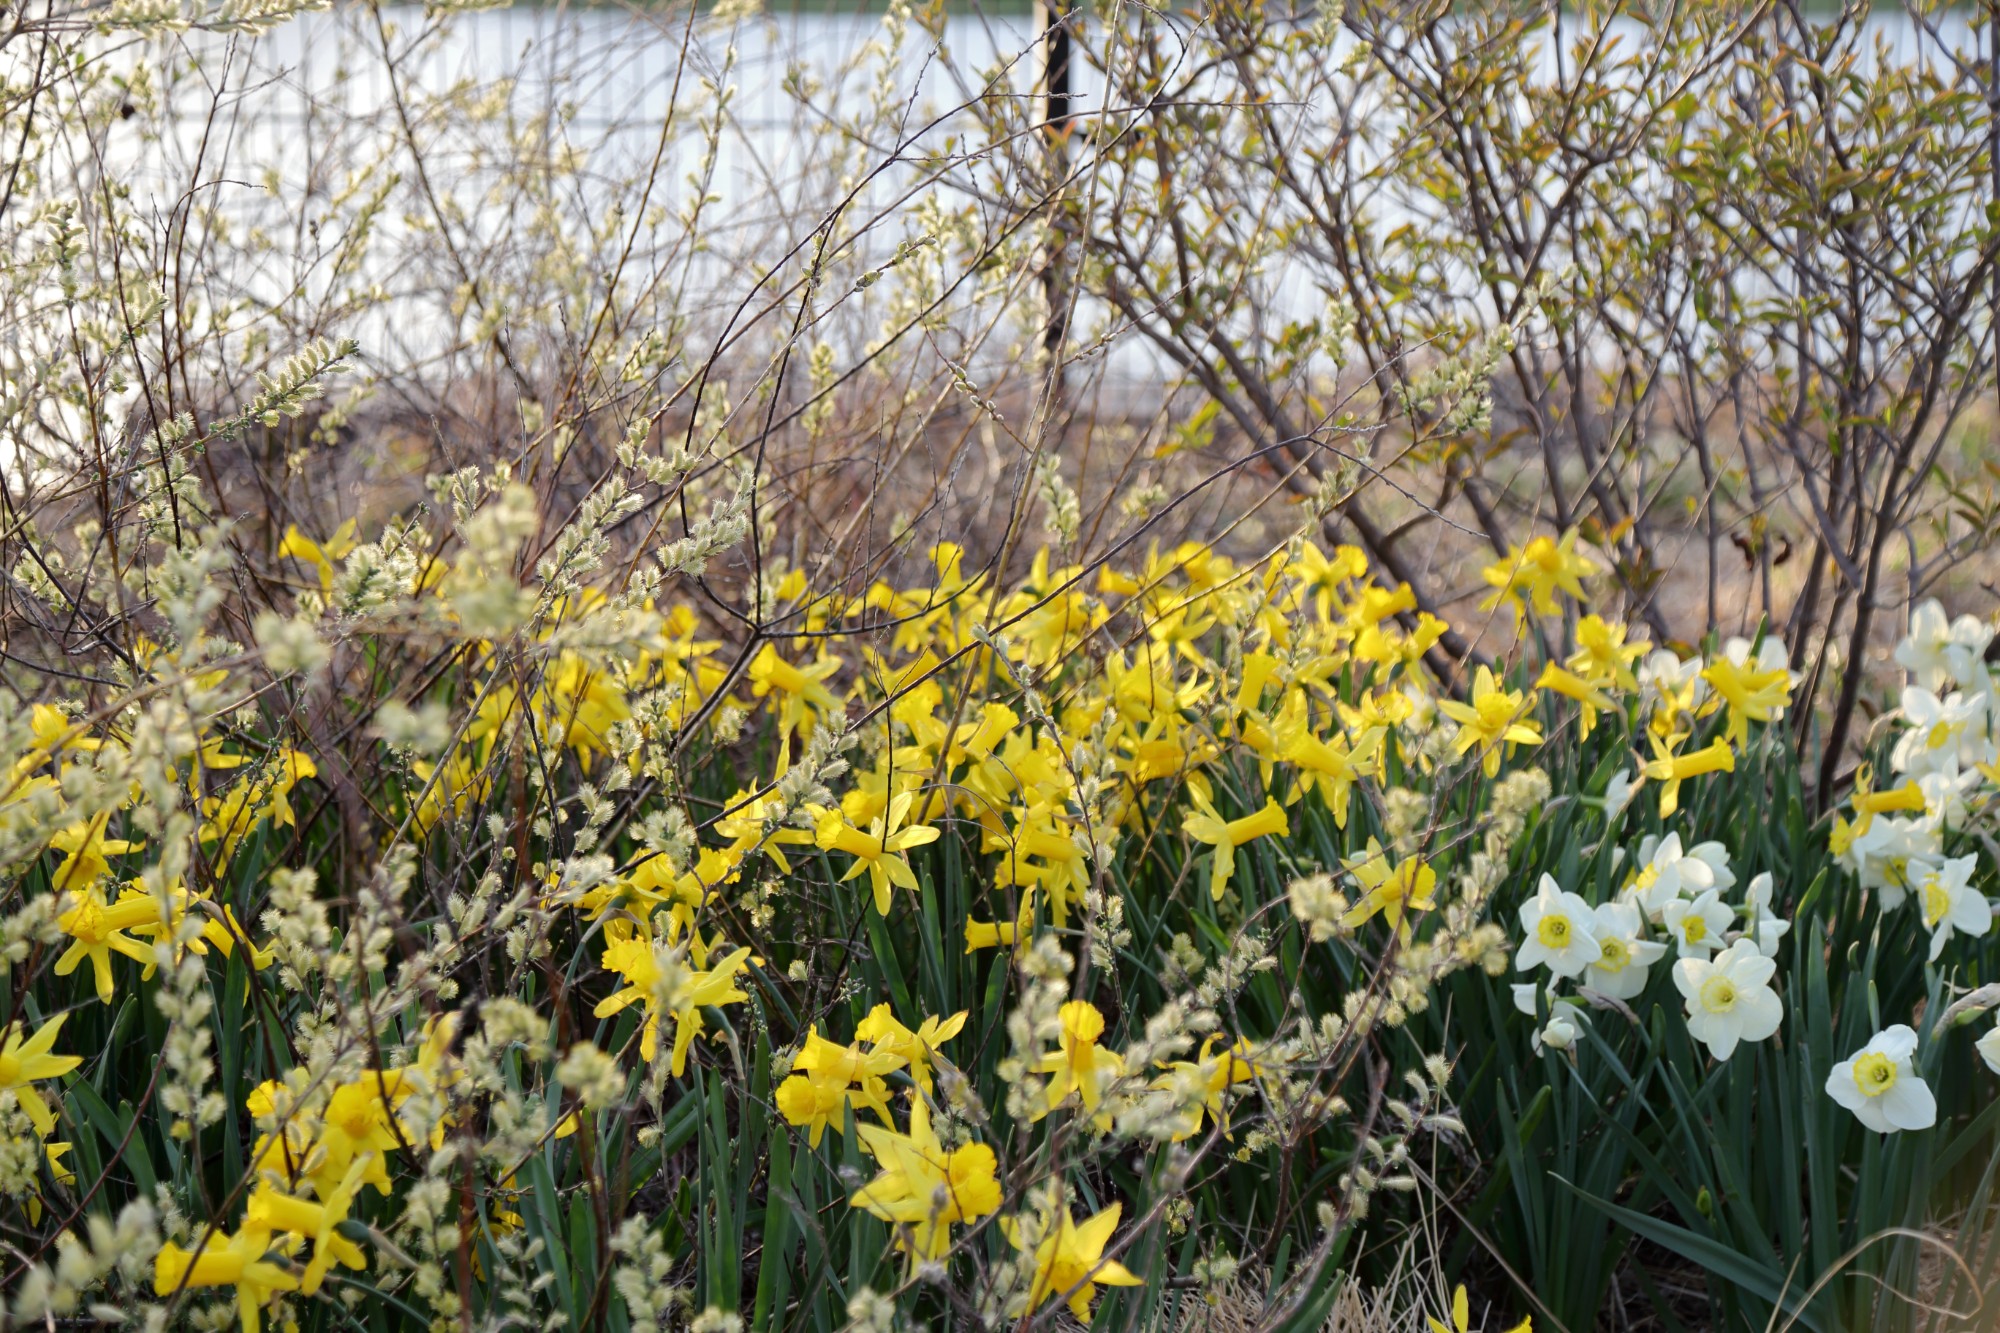 Salix repens 'Bridal Rice' and daffodils in the Lauridsen Savanna, May 2018. Photo by Kelly Norris.